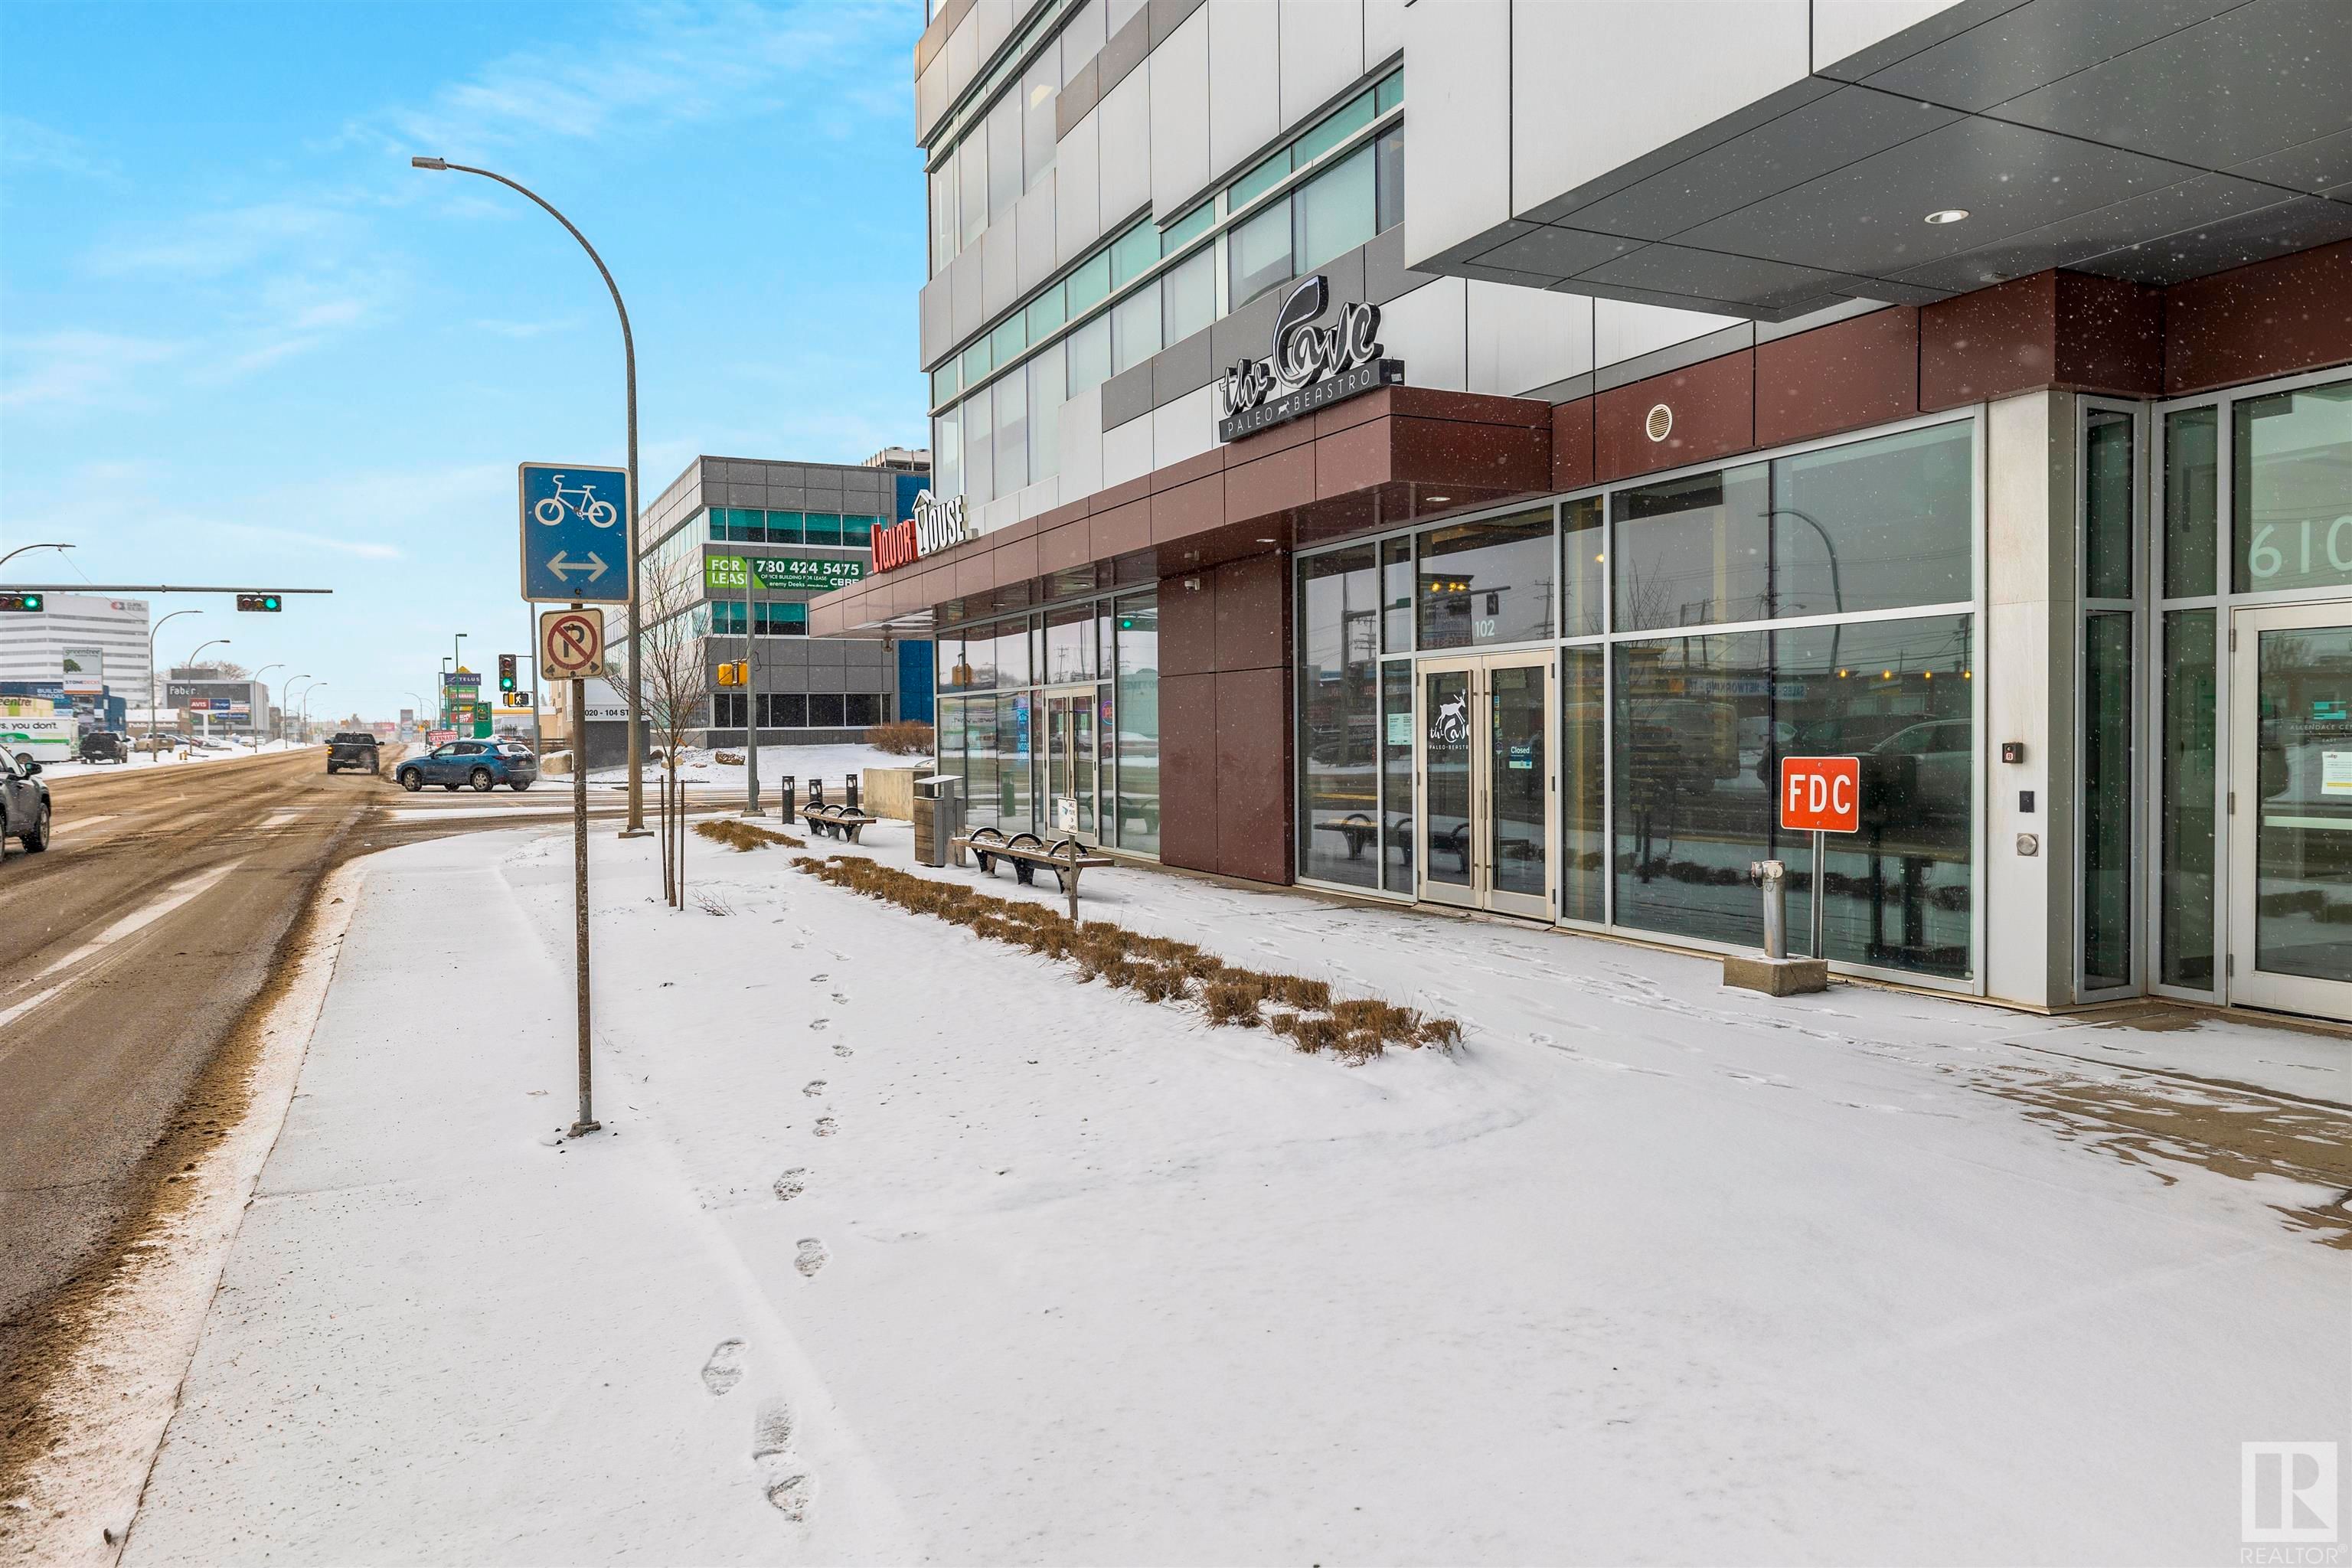 Main Photo: 0 N/A in Edmonton: Zone 15 Business for sale : MLS®# E4278333